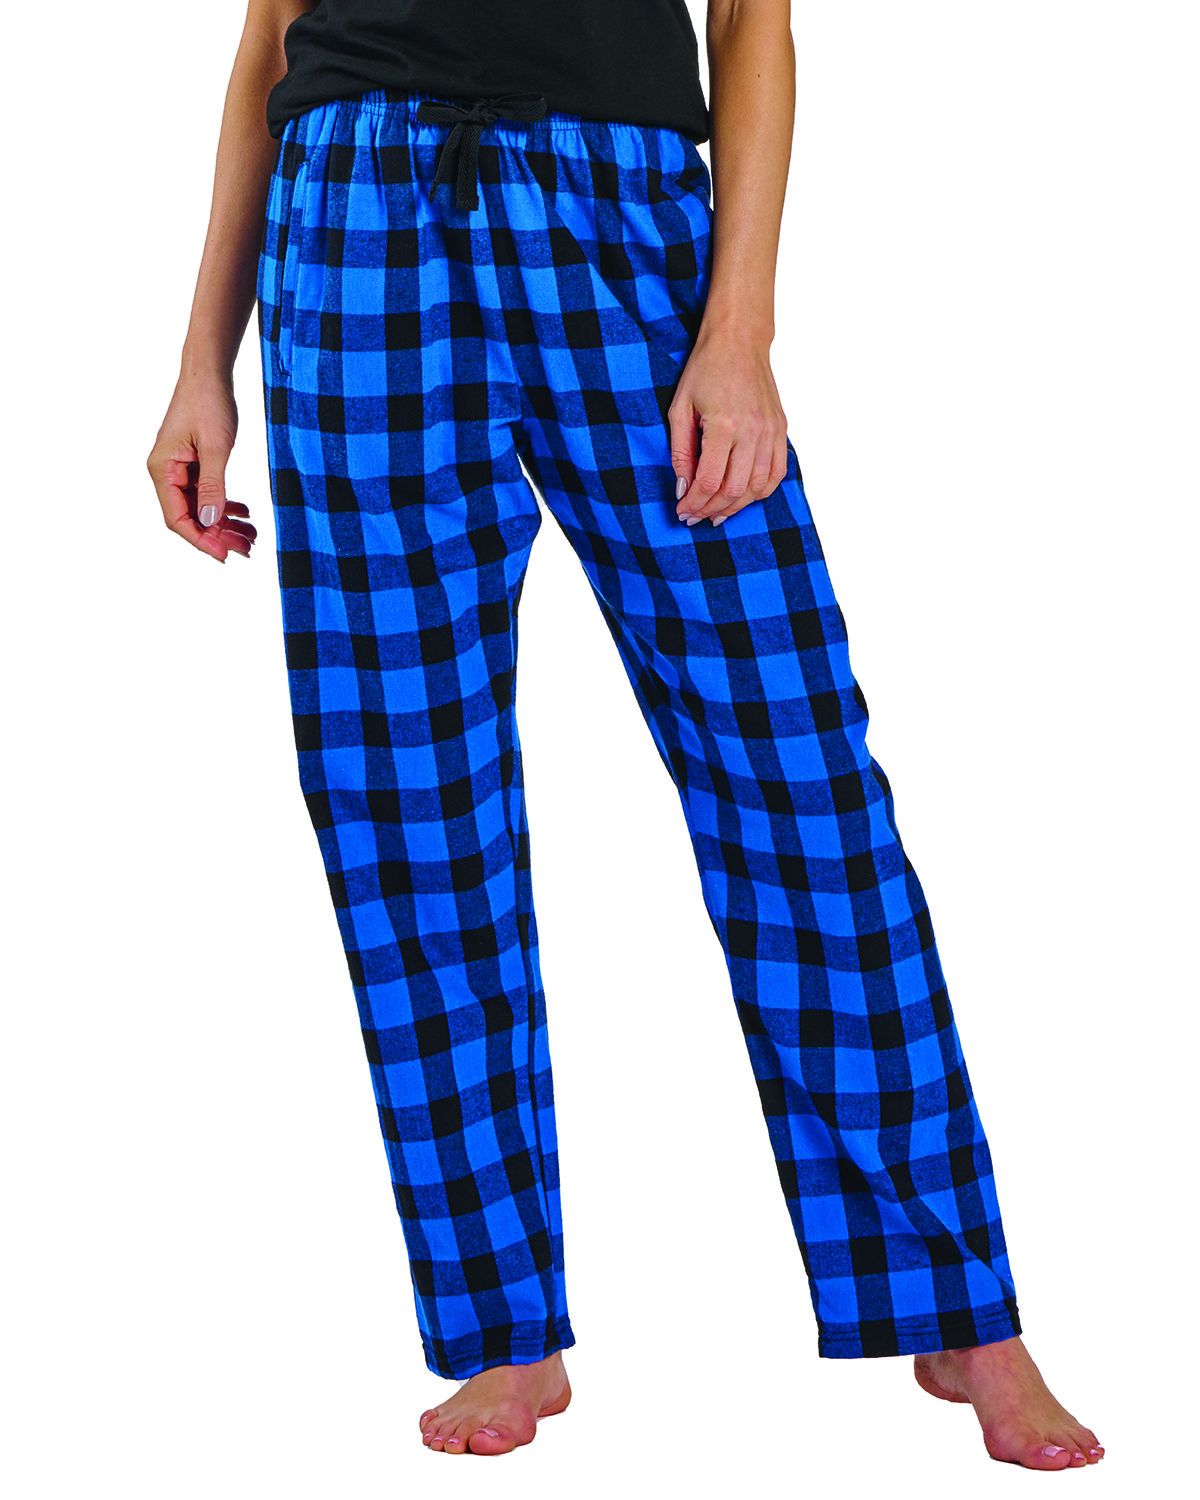 Boxercraft Ladies' 'Haley' Flannel Pant with Pockets | alphabroder